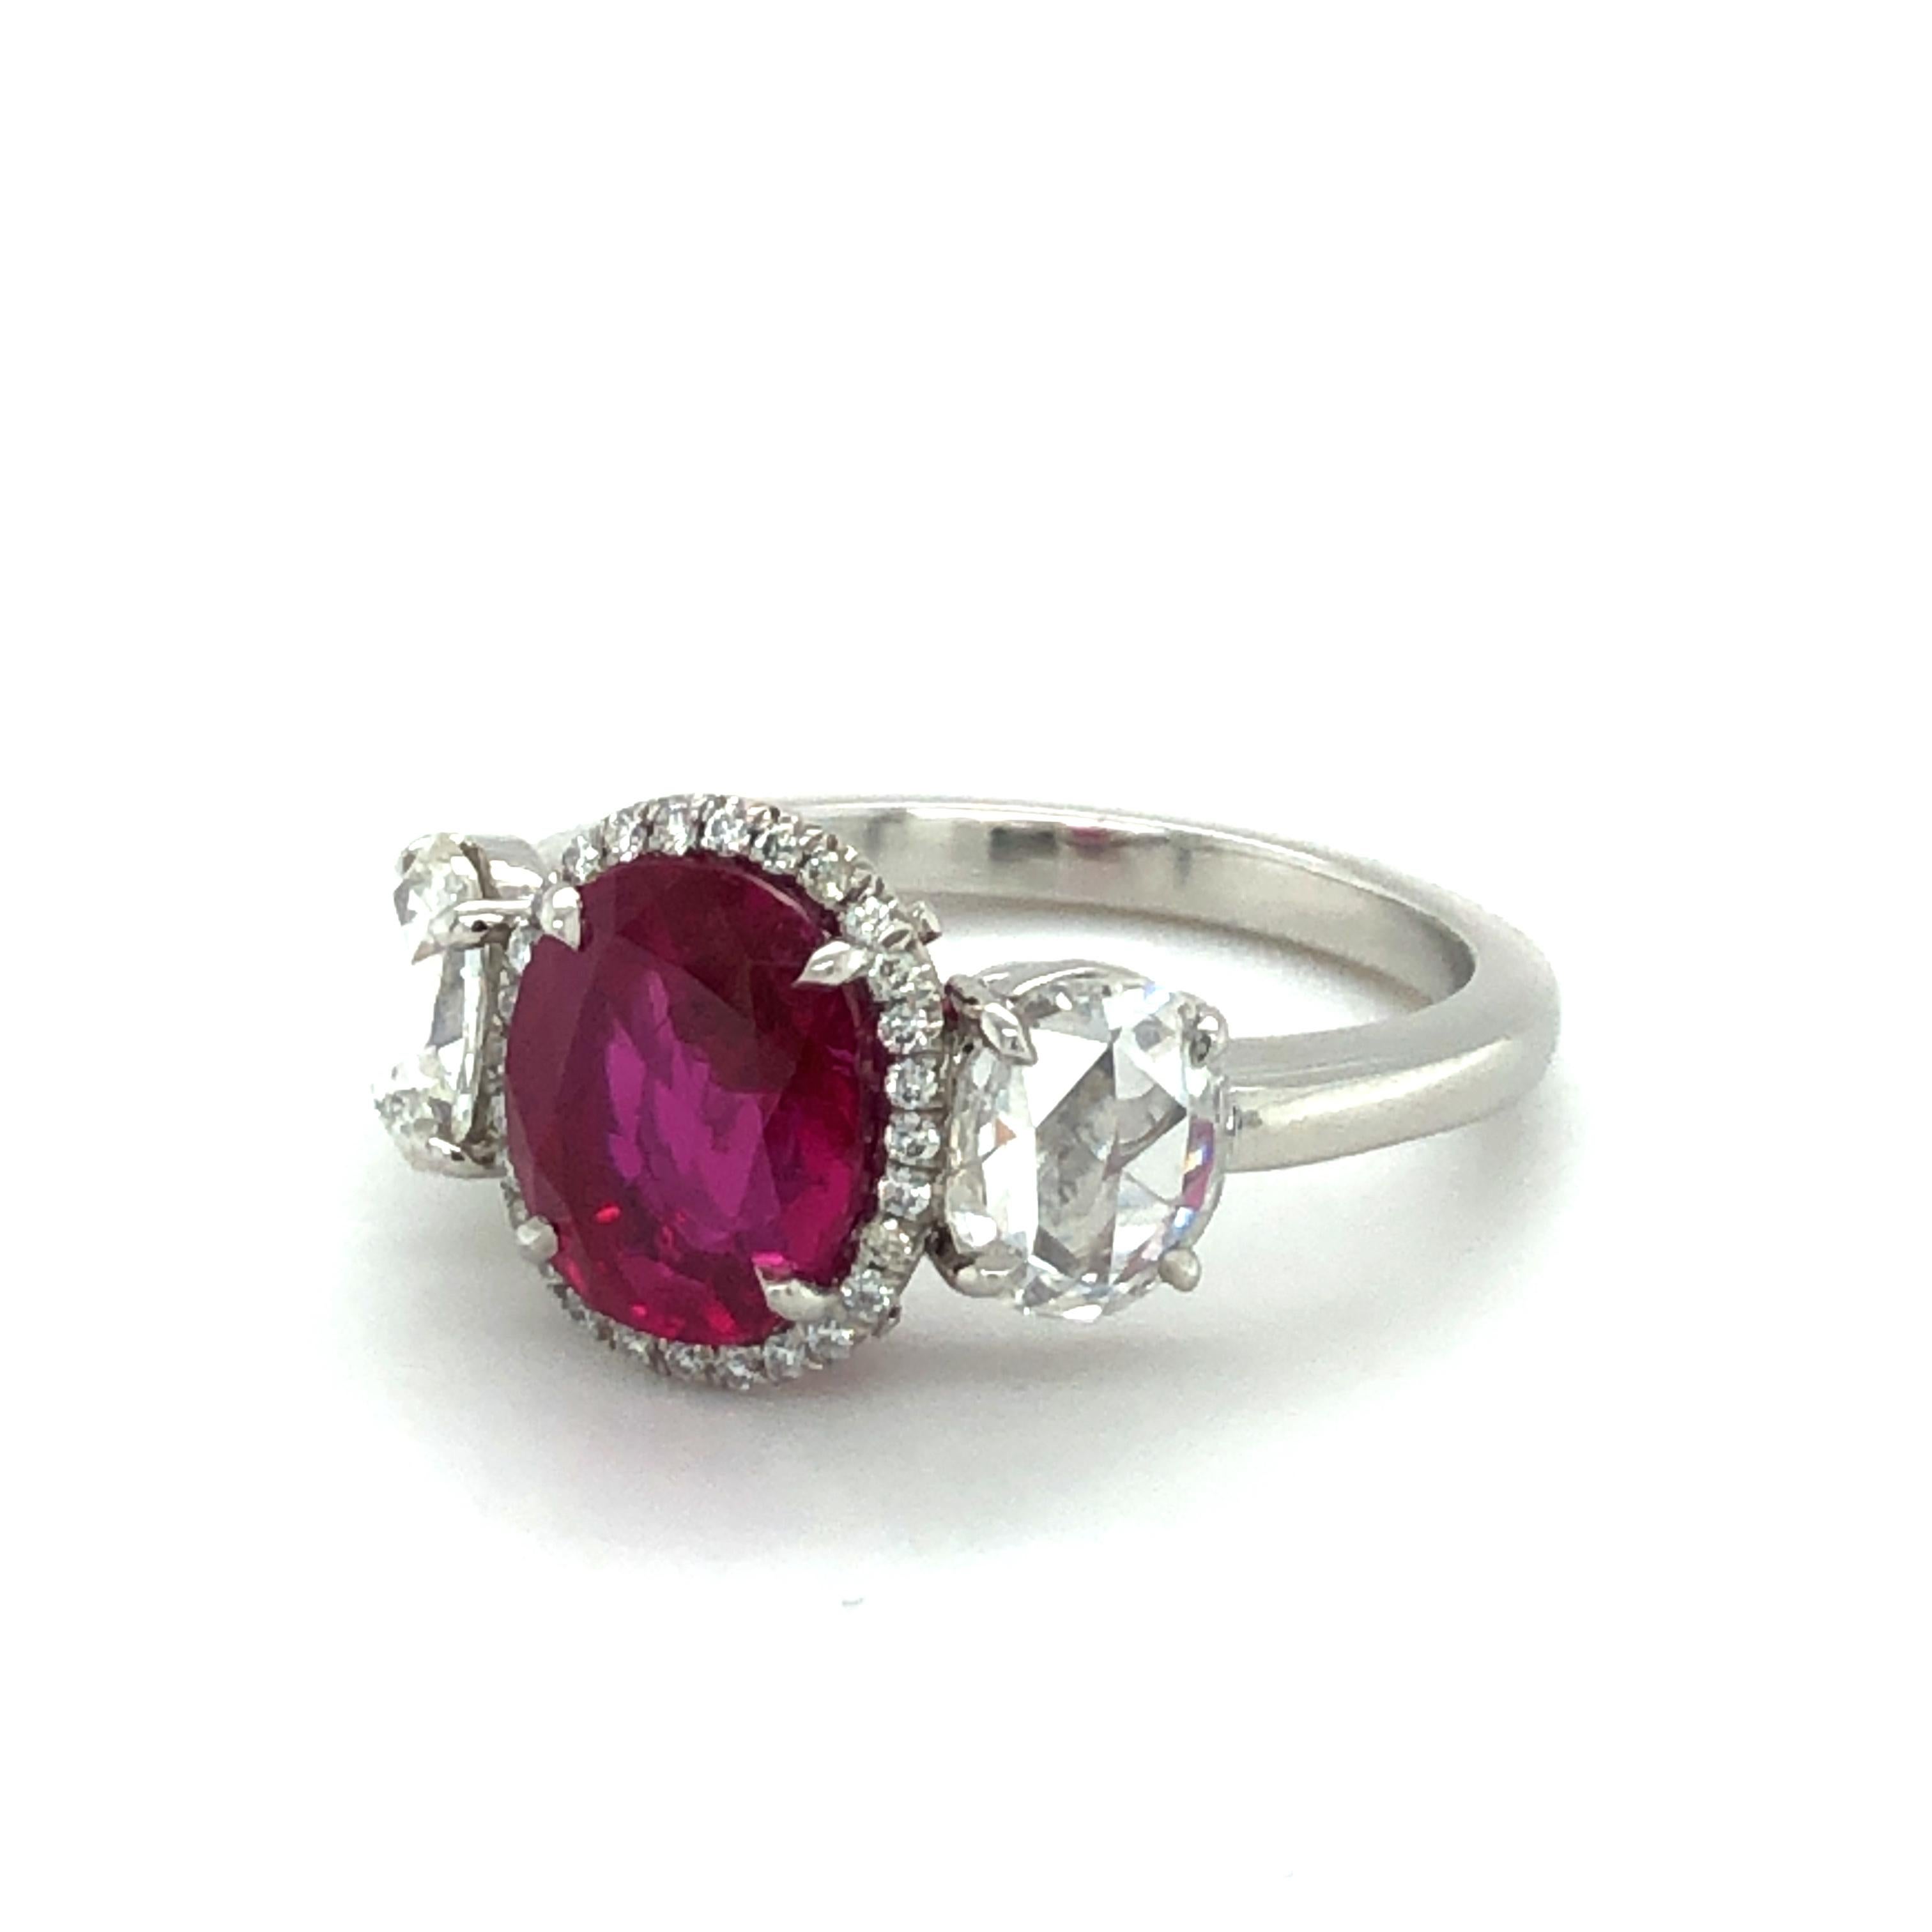 This stunning three-stone ring features a superb 2.73 ct Burma Ruby and two rose cut diamonds of H/I color and si1 clarity, total weight 1.10 carats.
The delicate entourage around the ruby consists of 27 brilliant cut diamonds of G/H color and vs